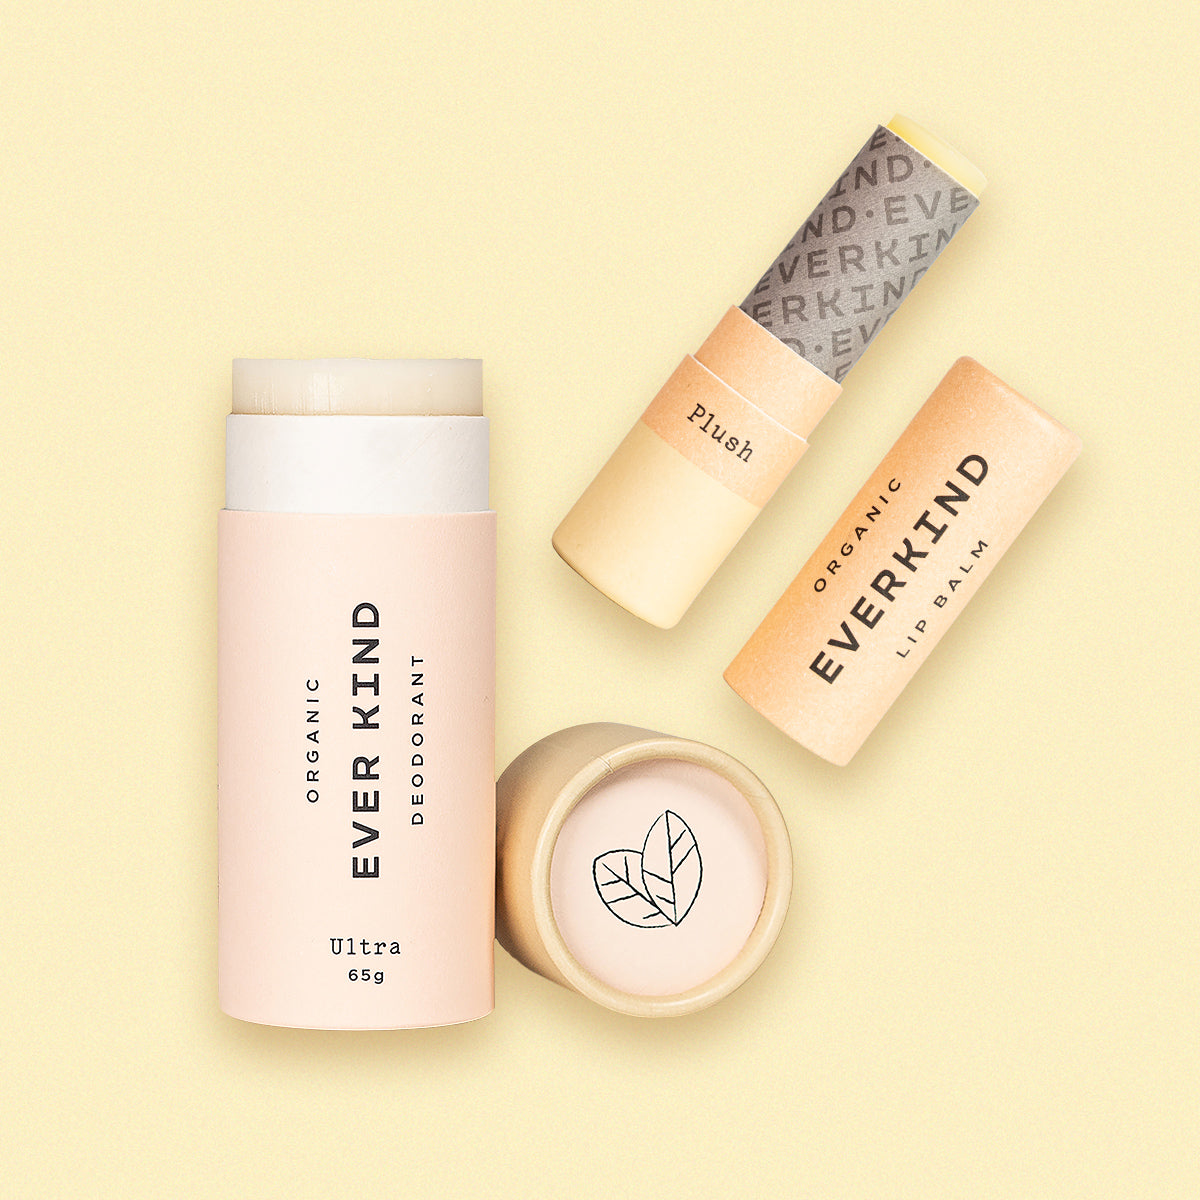 Daily bodycare essentials from Everkind. Making the switch to natural has never been so easy, with Ultra natural deodorant and Plush natural lip balm for an eco-luxe start to your day.